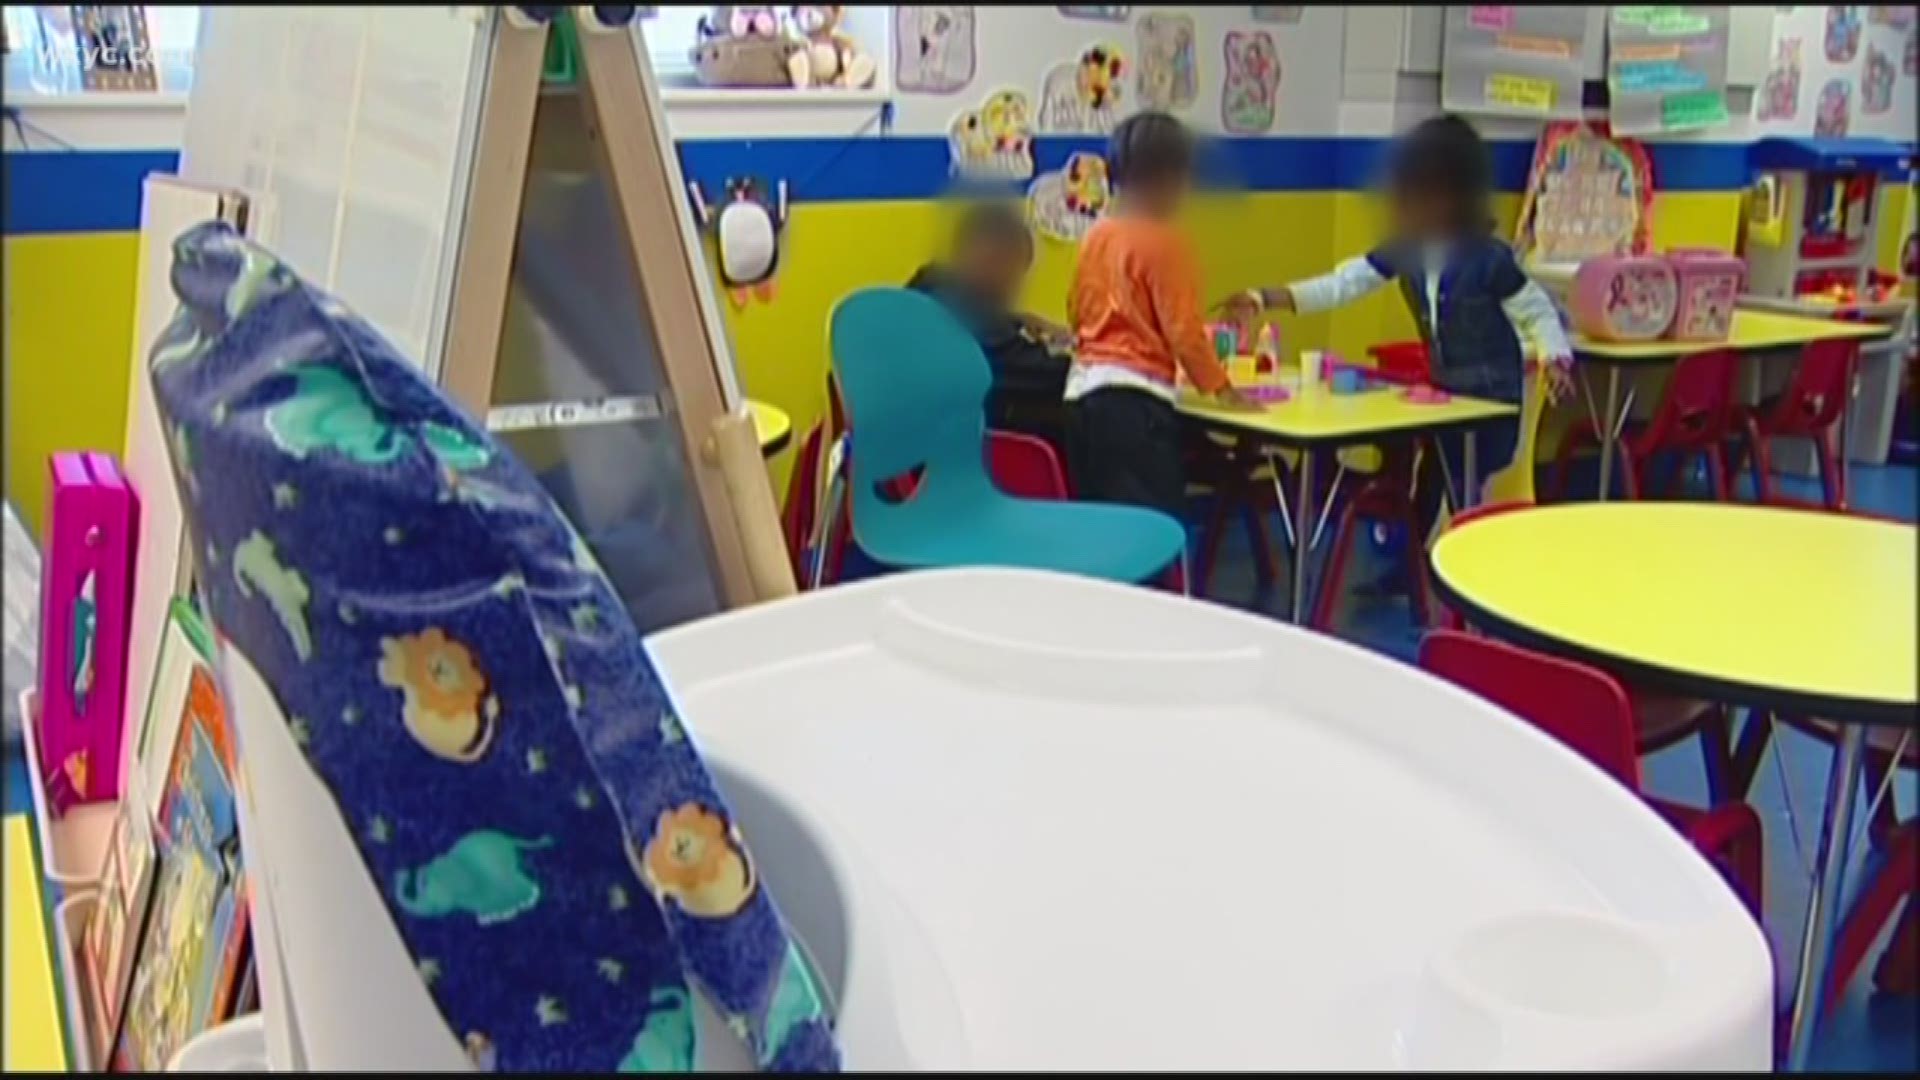 Local day cares are charging parents for care the kids aren't receiving amid the COVID-19 pandemic. 3News' Rachel Polansky has this story.